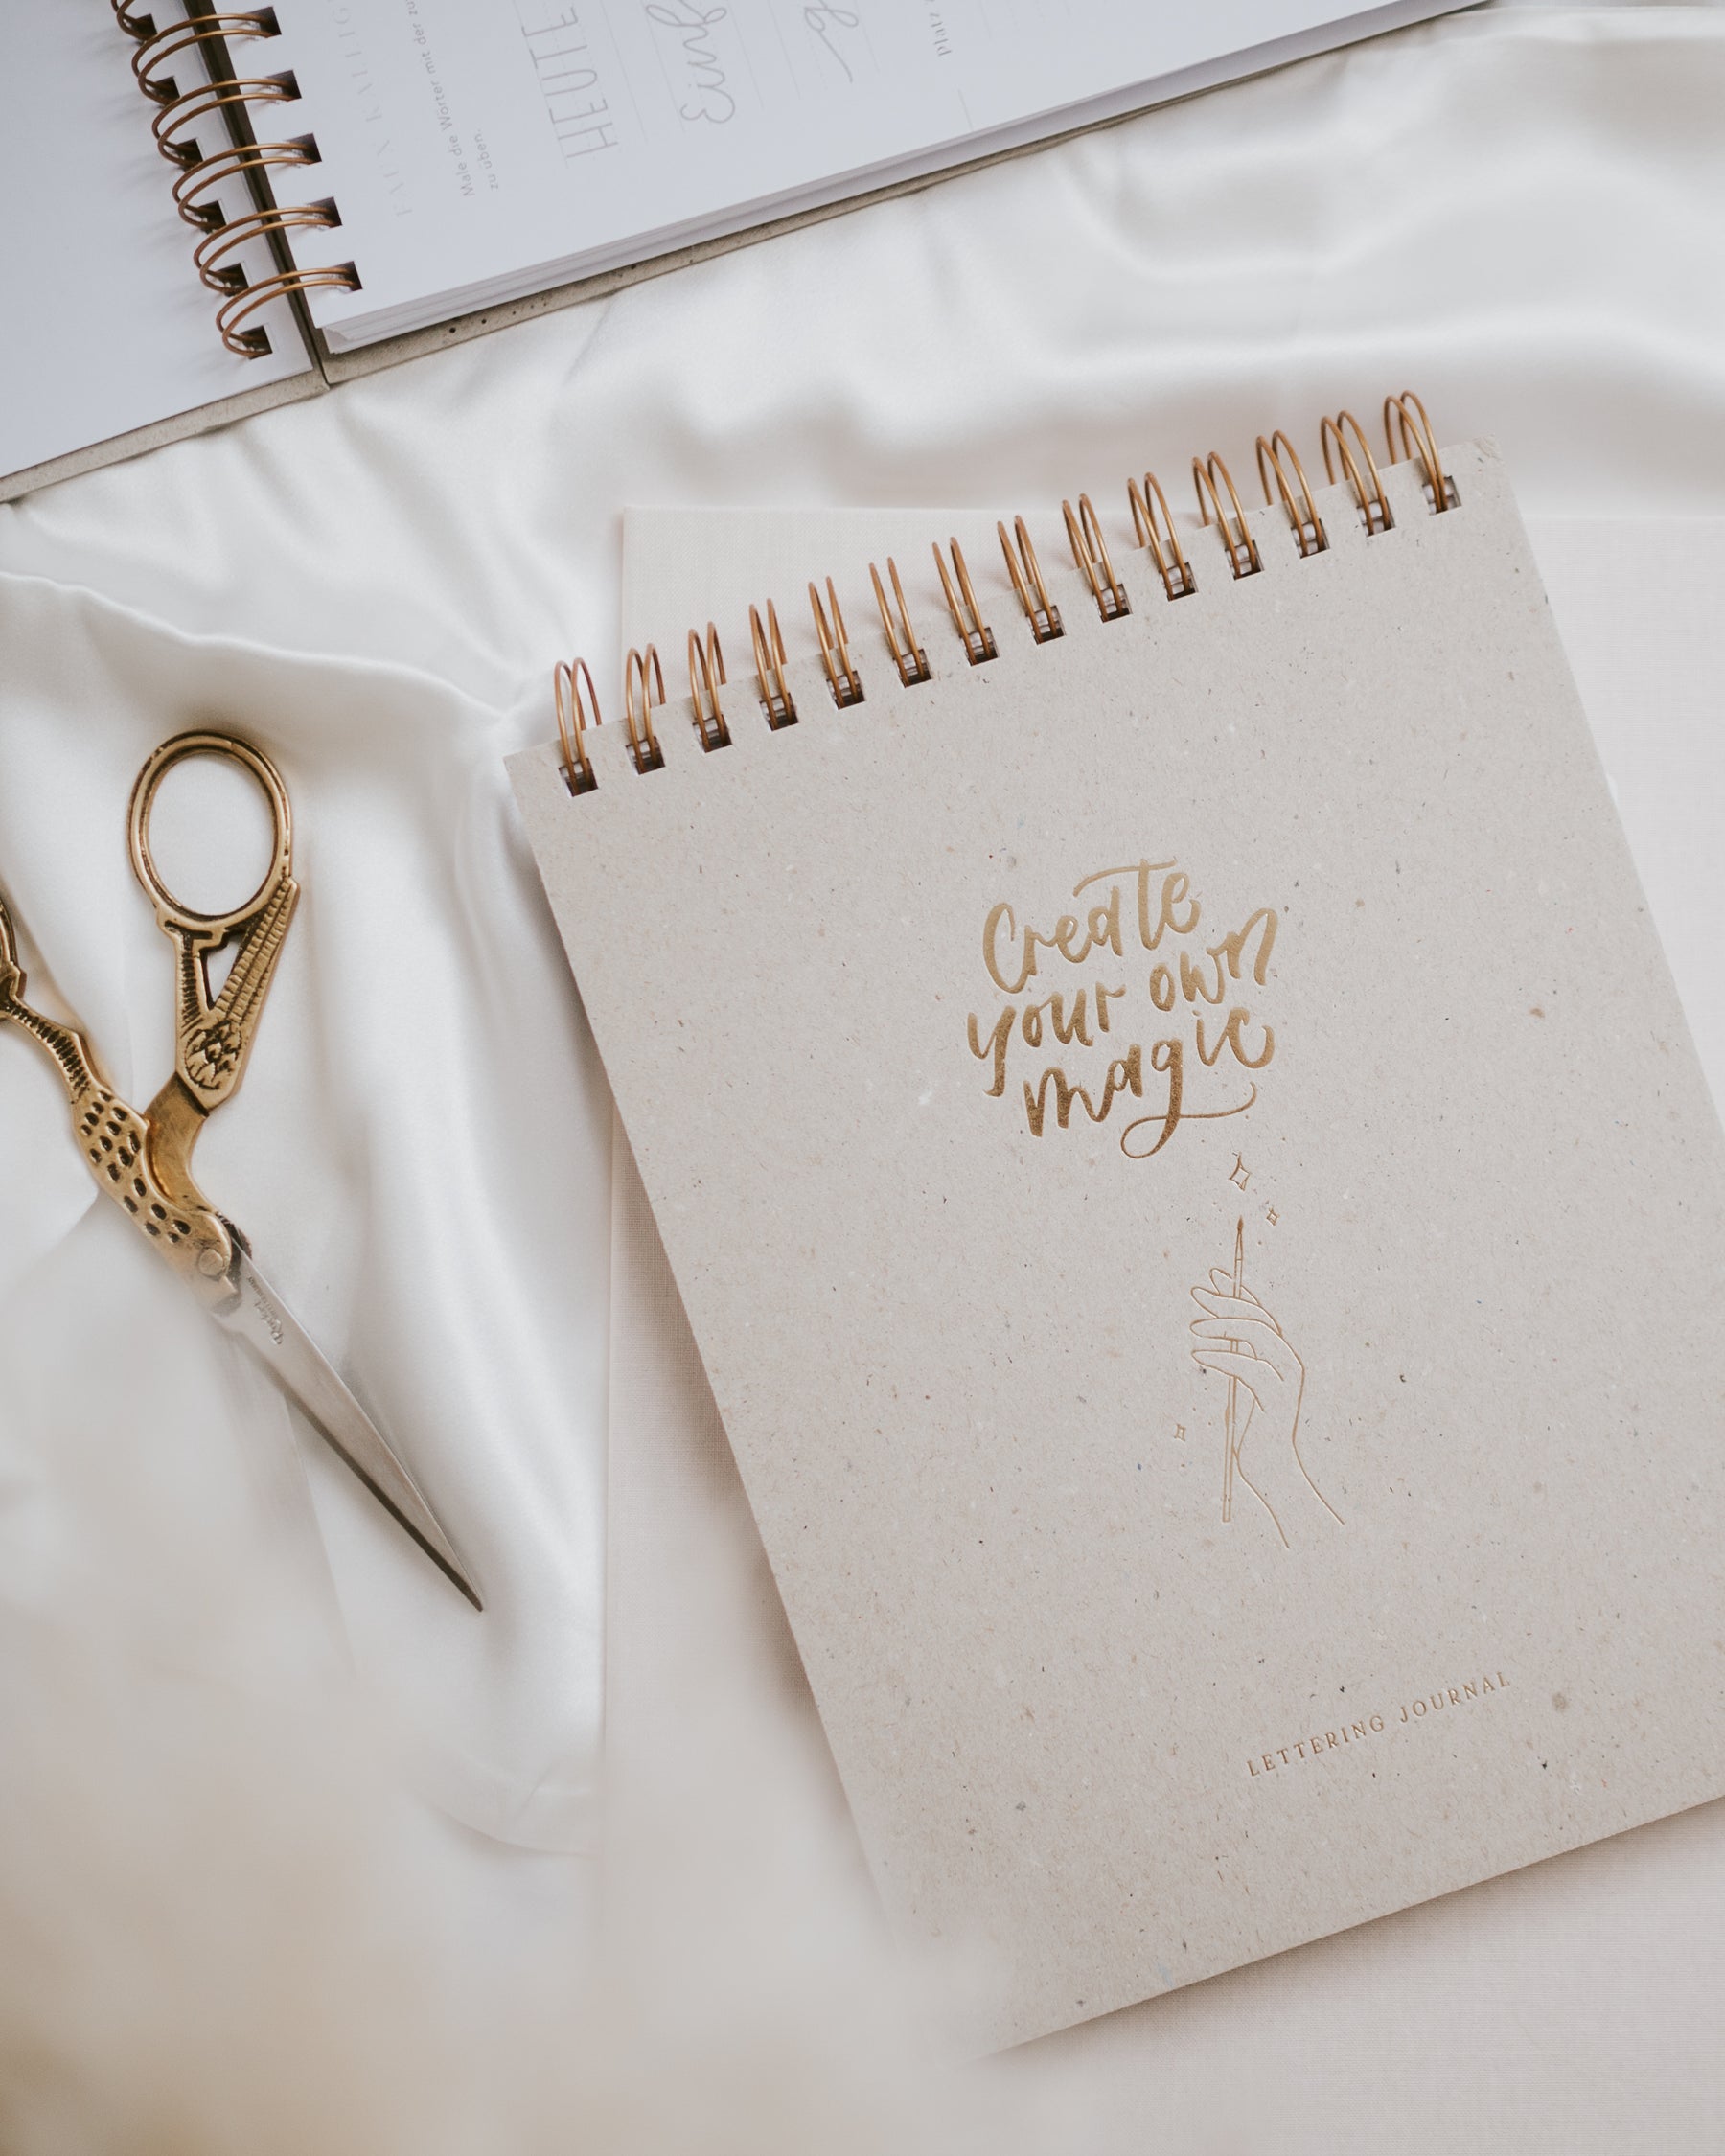 Handlettering Journal "Create your own magic"